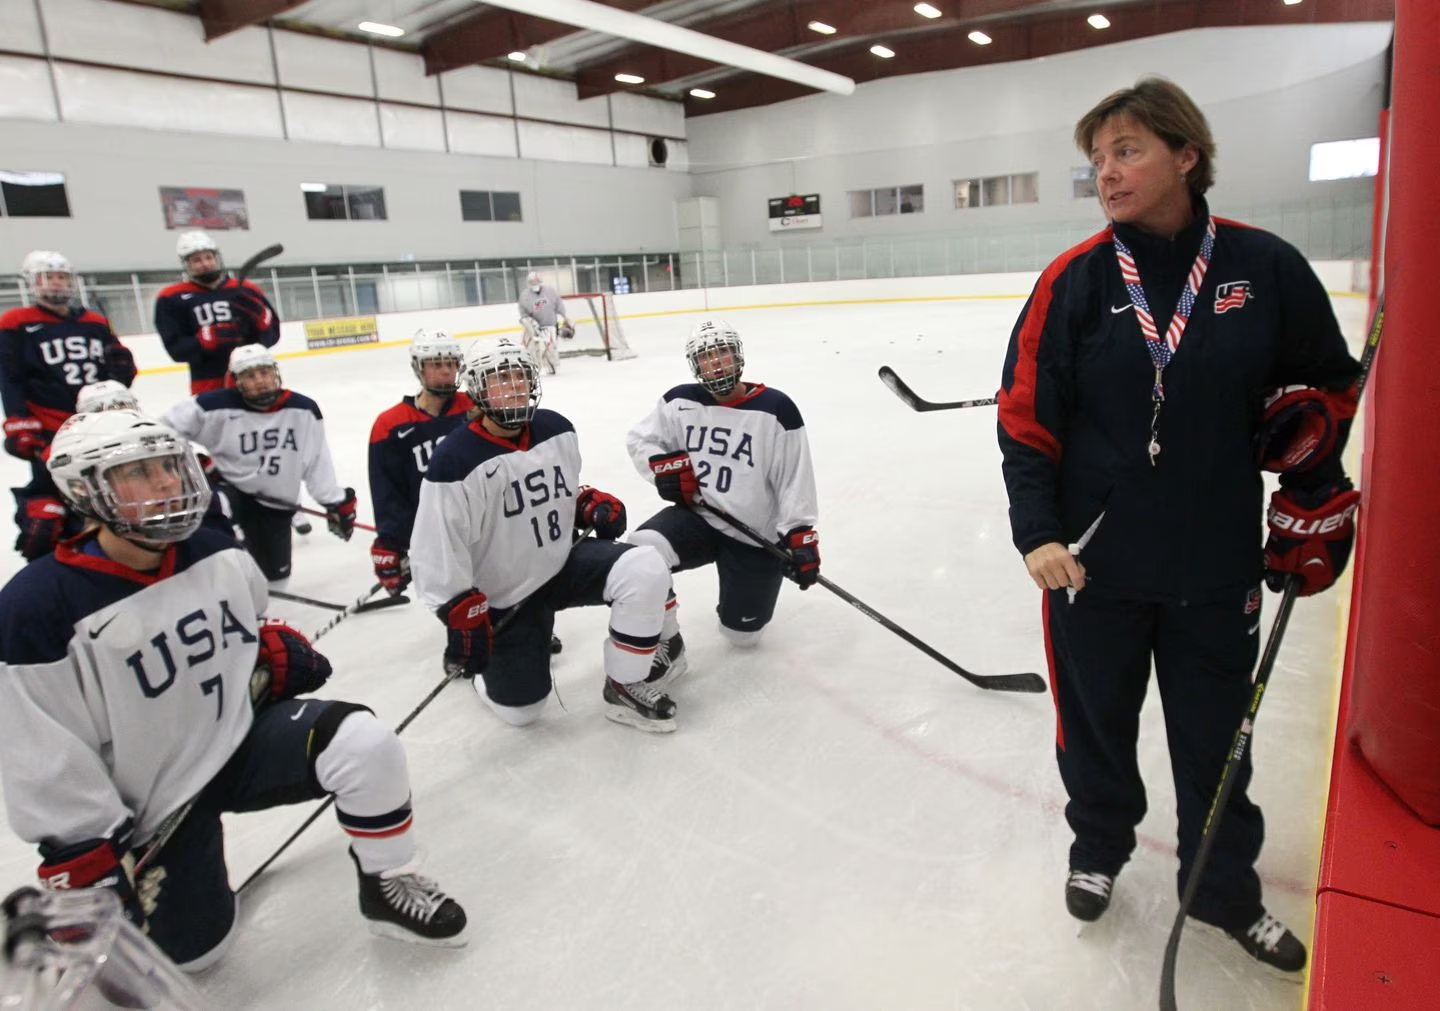 Katey Stone also coached the US women's hockey team in 2014, during the Sochi Olympics. The Americans won silver.